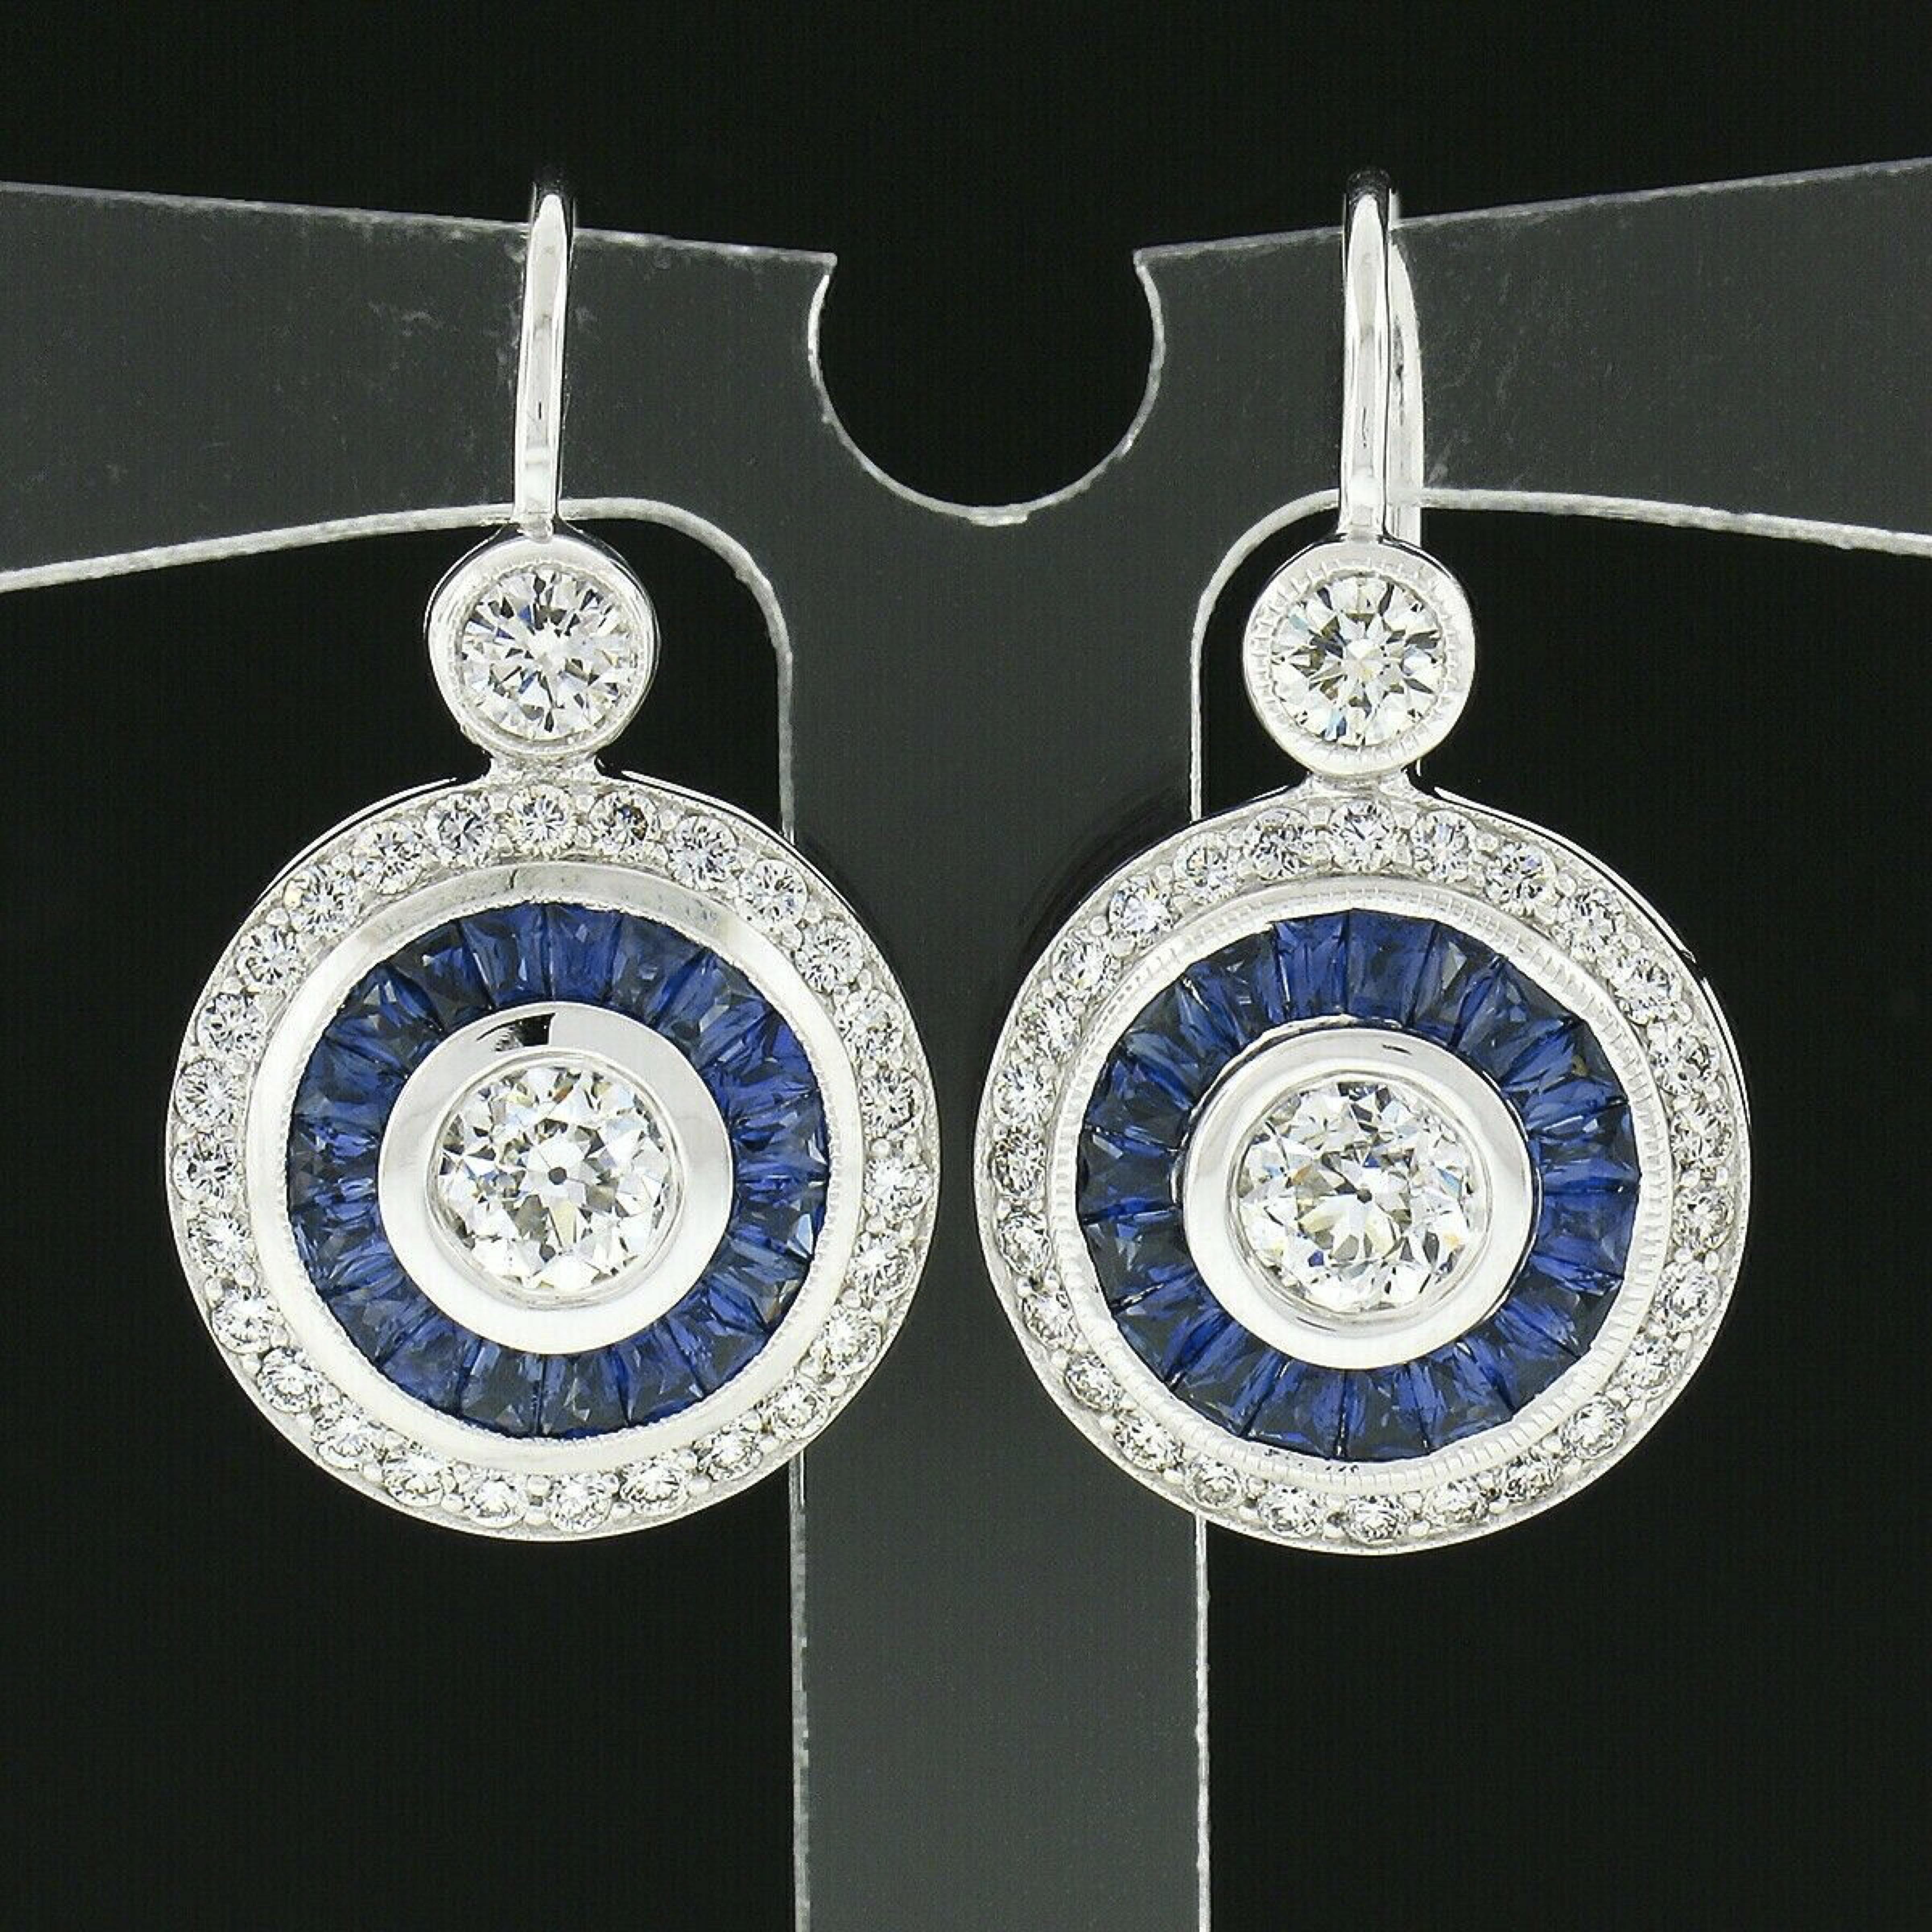 This spectacular and very well made pair of drop earrings is newly crafted in solid 14k white gold and feature two antique, old European cut, diamonds that are neatly bezel set at their center and further surrounded by gorgeous natural rubies and